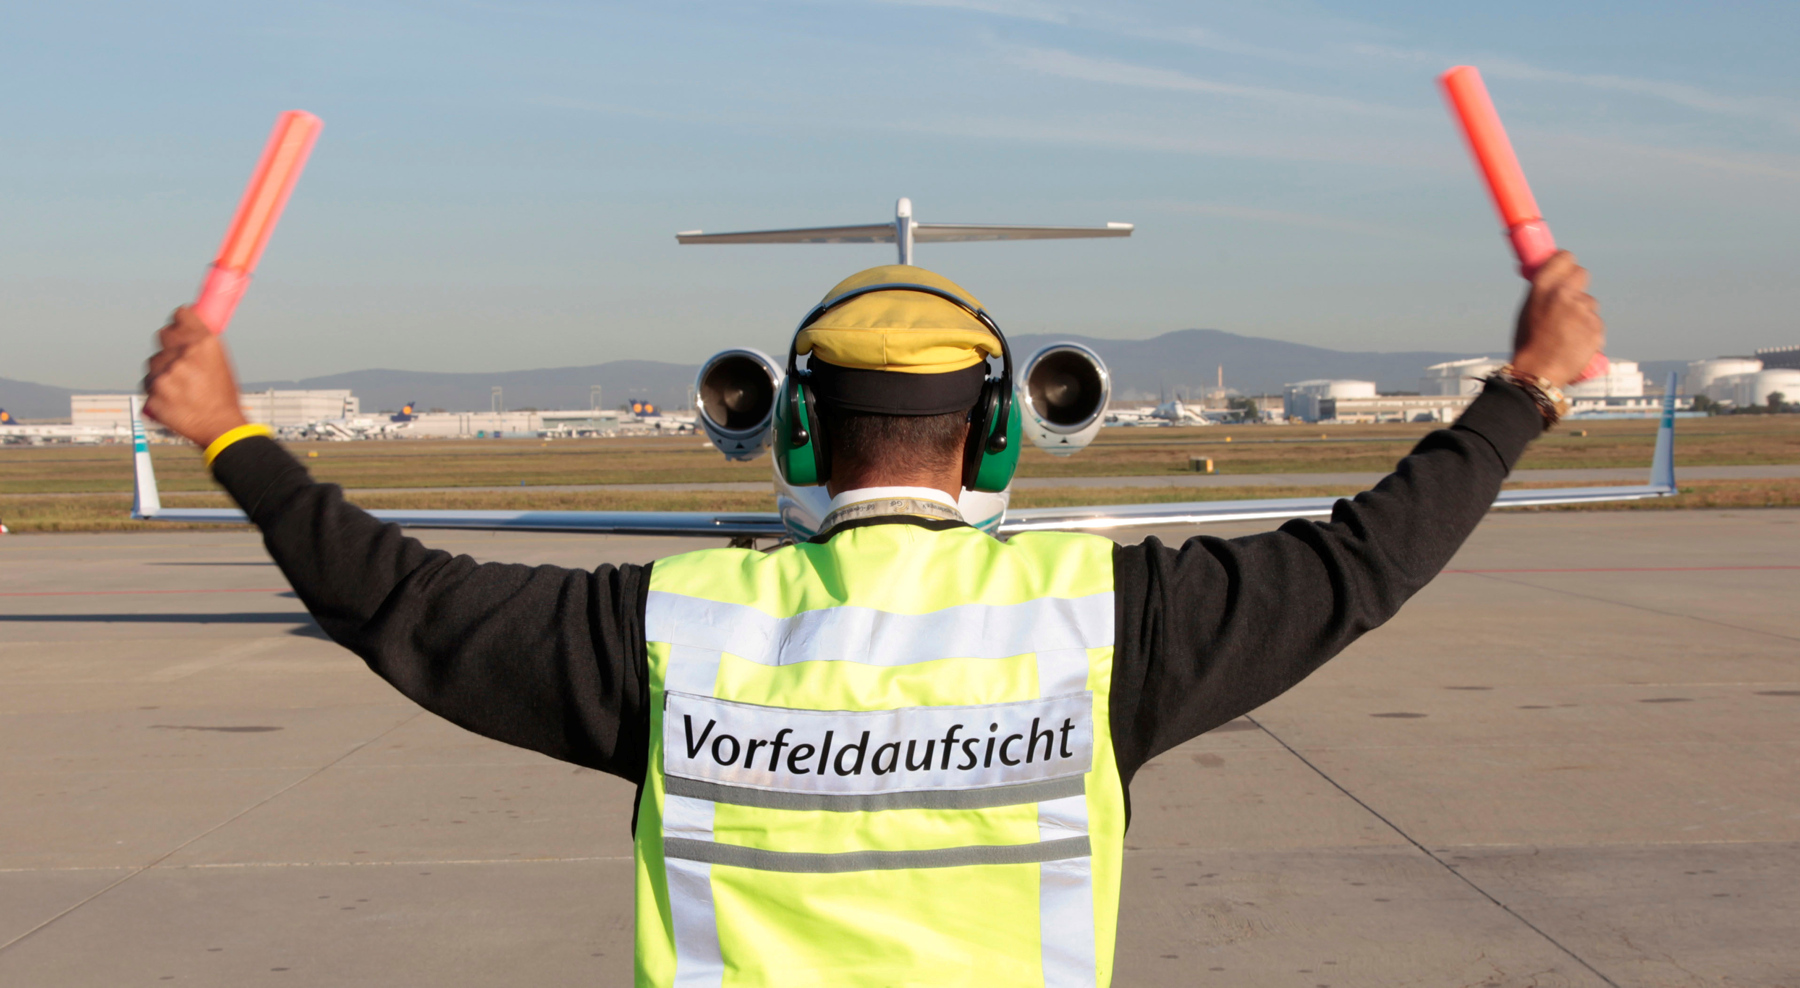 On March13th in Germany were cancelled 350 flights because of the strikes